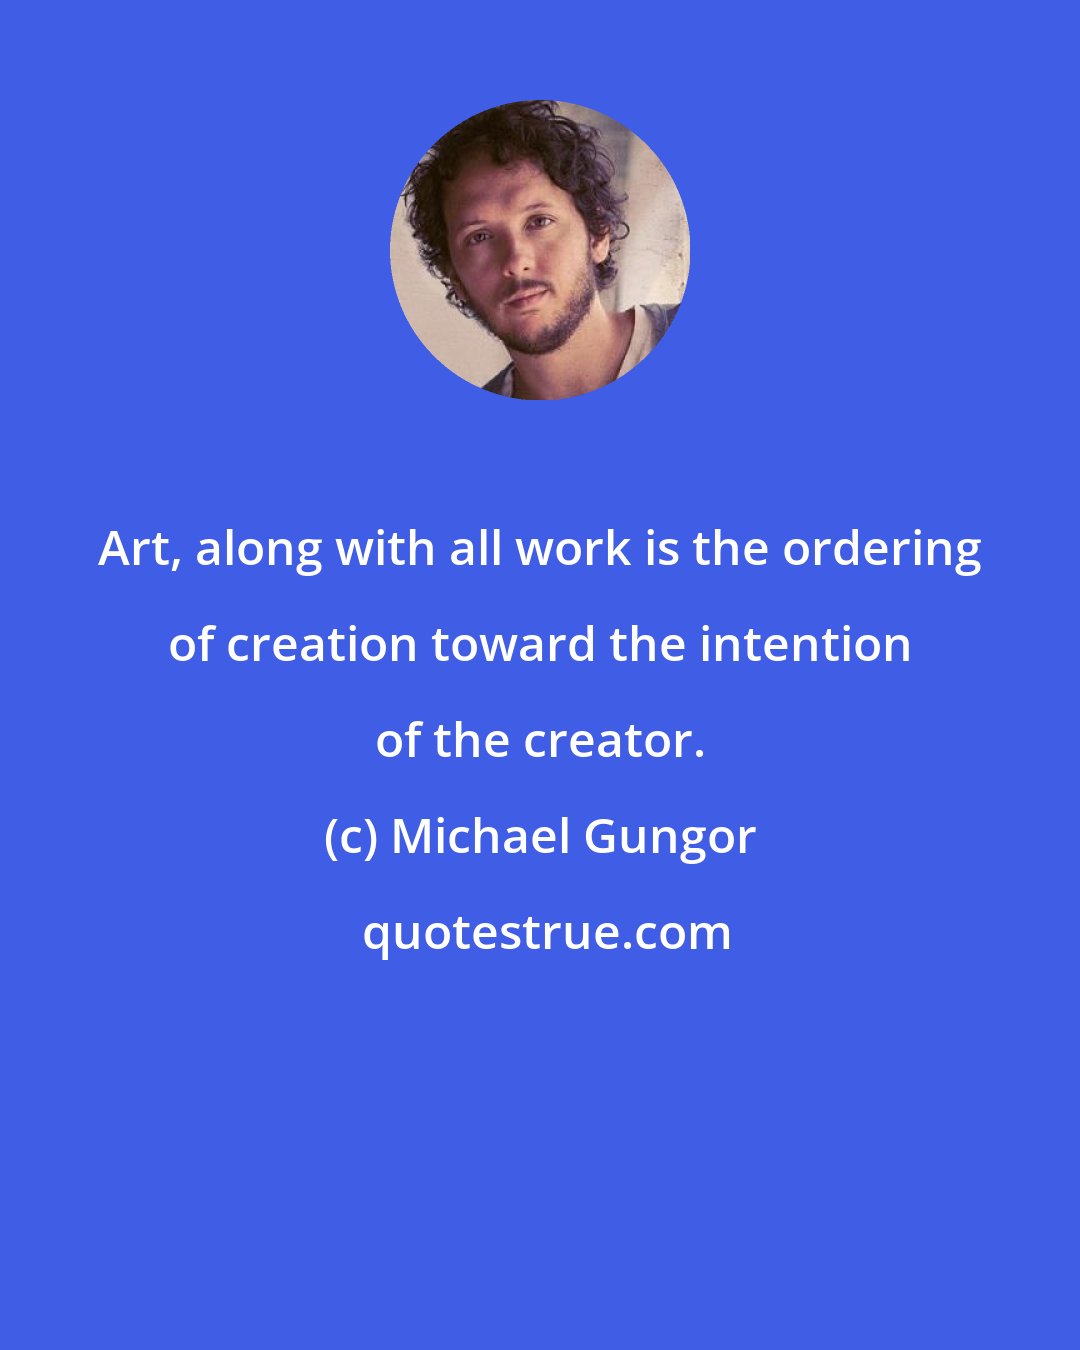 Michael Gungor: Art, along with all work is the ordering of creation toward the intention of the creator.